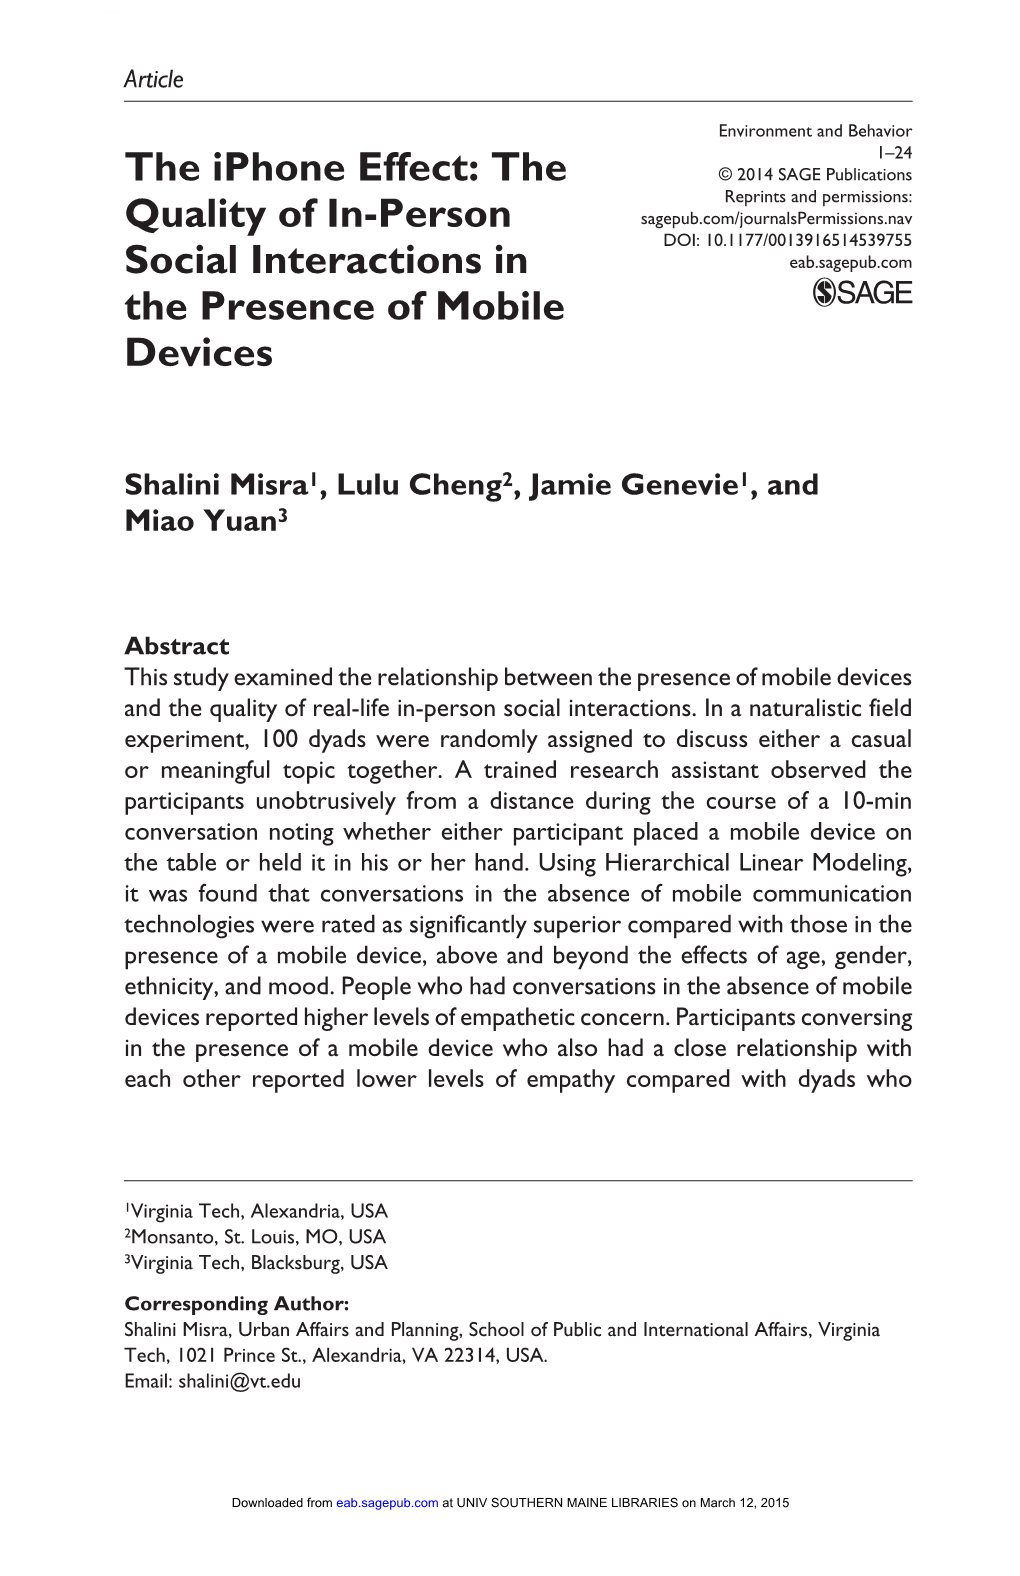 The Iphone Effect: the Quality of In-Person Social Interactions in The